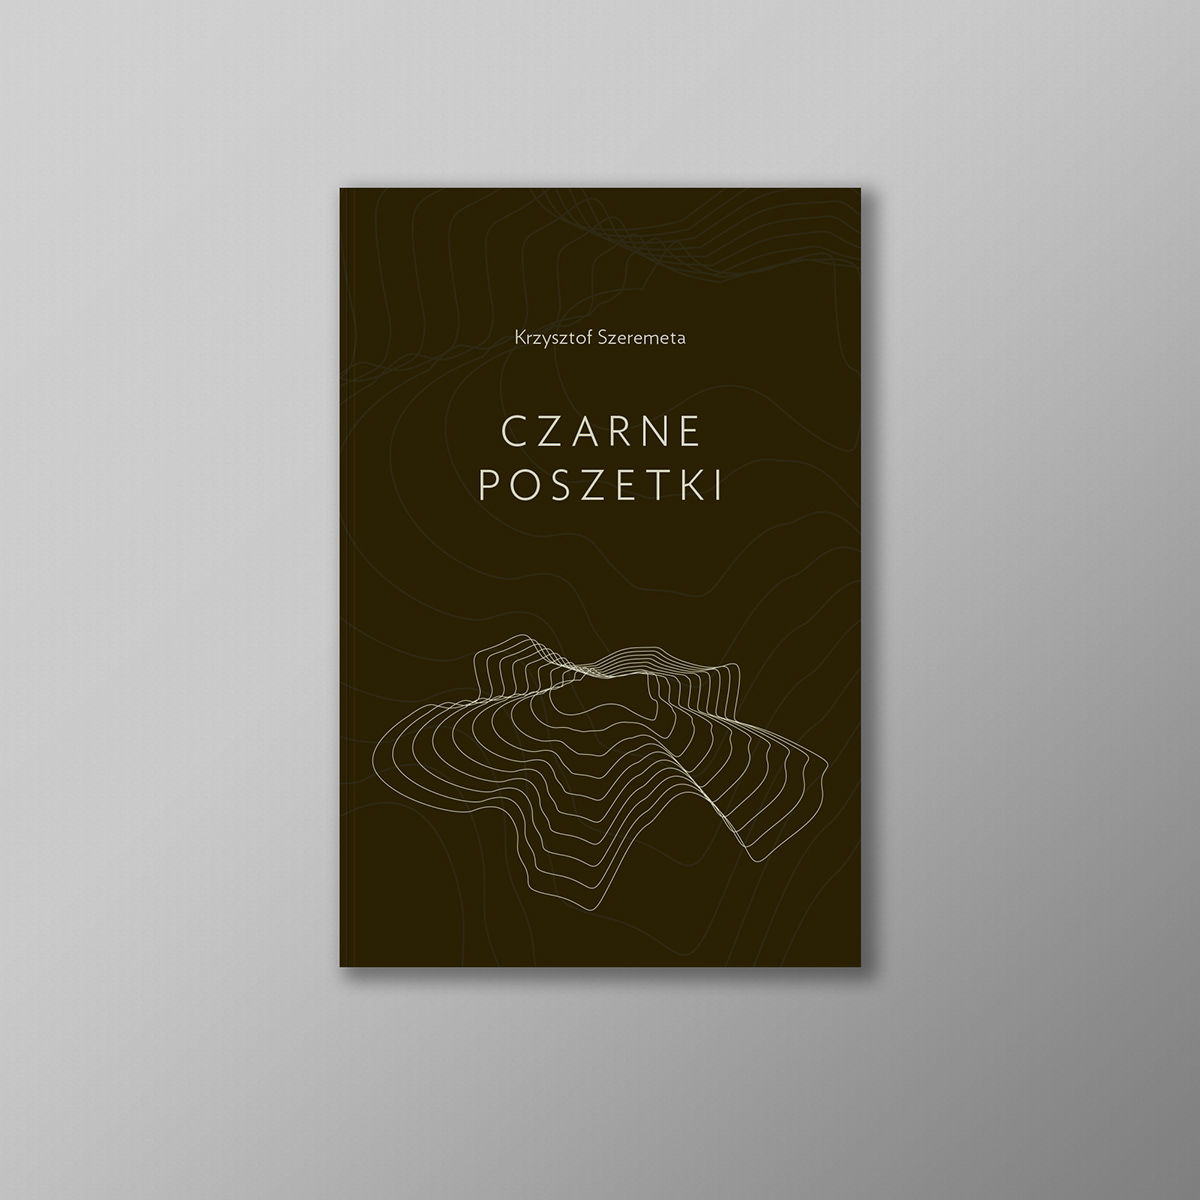 Poetry  cover typography   Minimalism book print publishing   cracow lodz